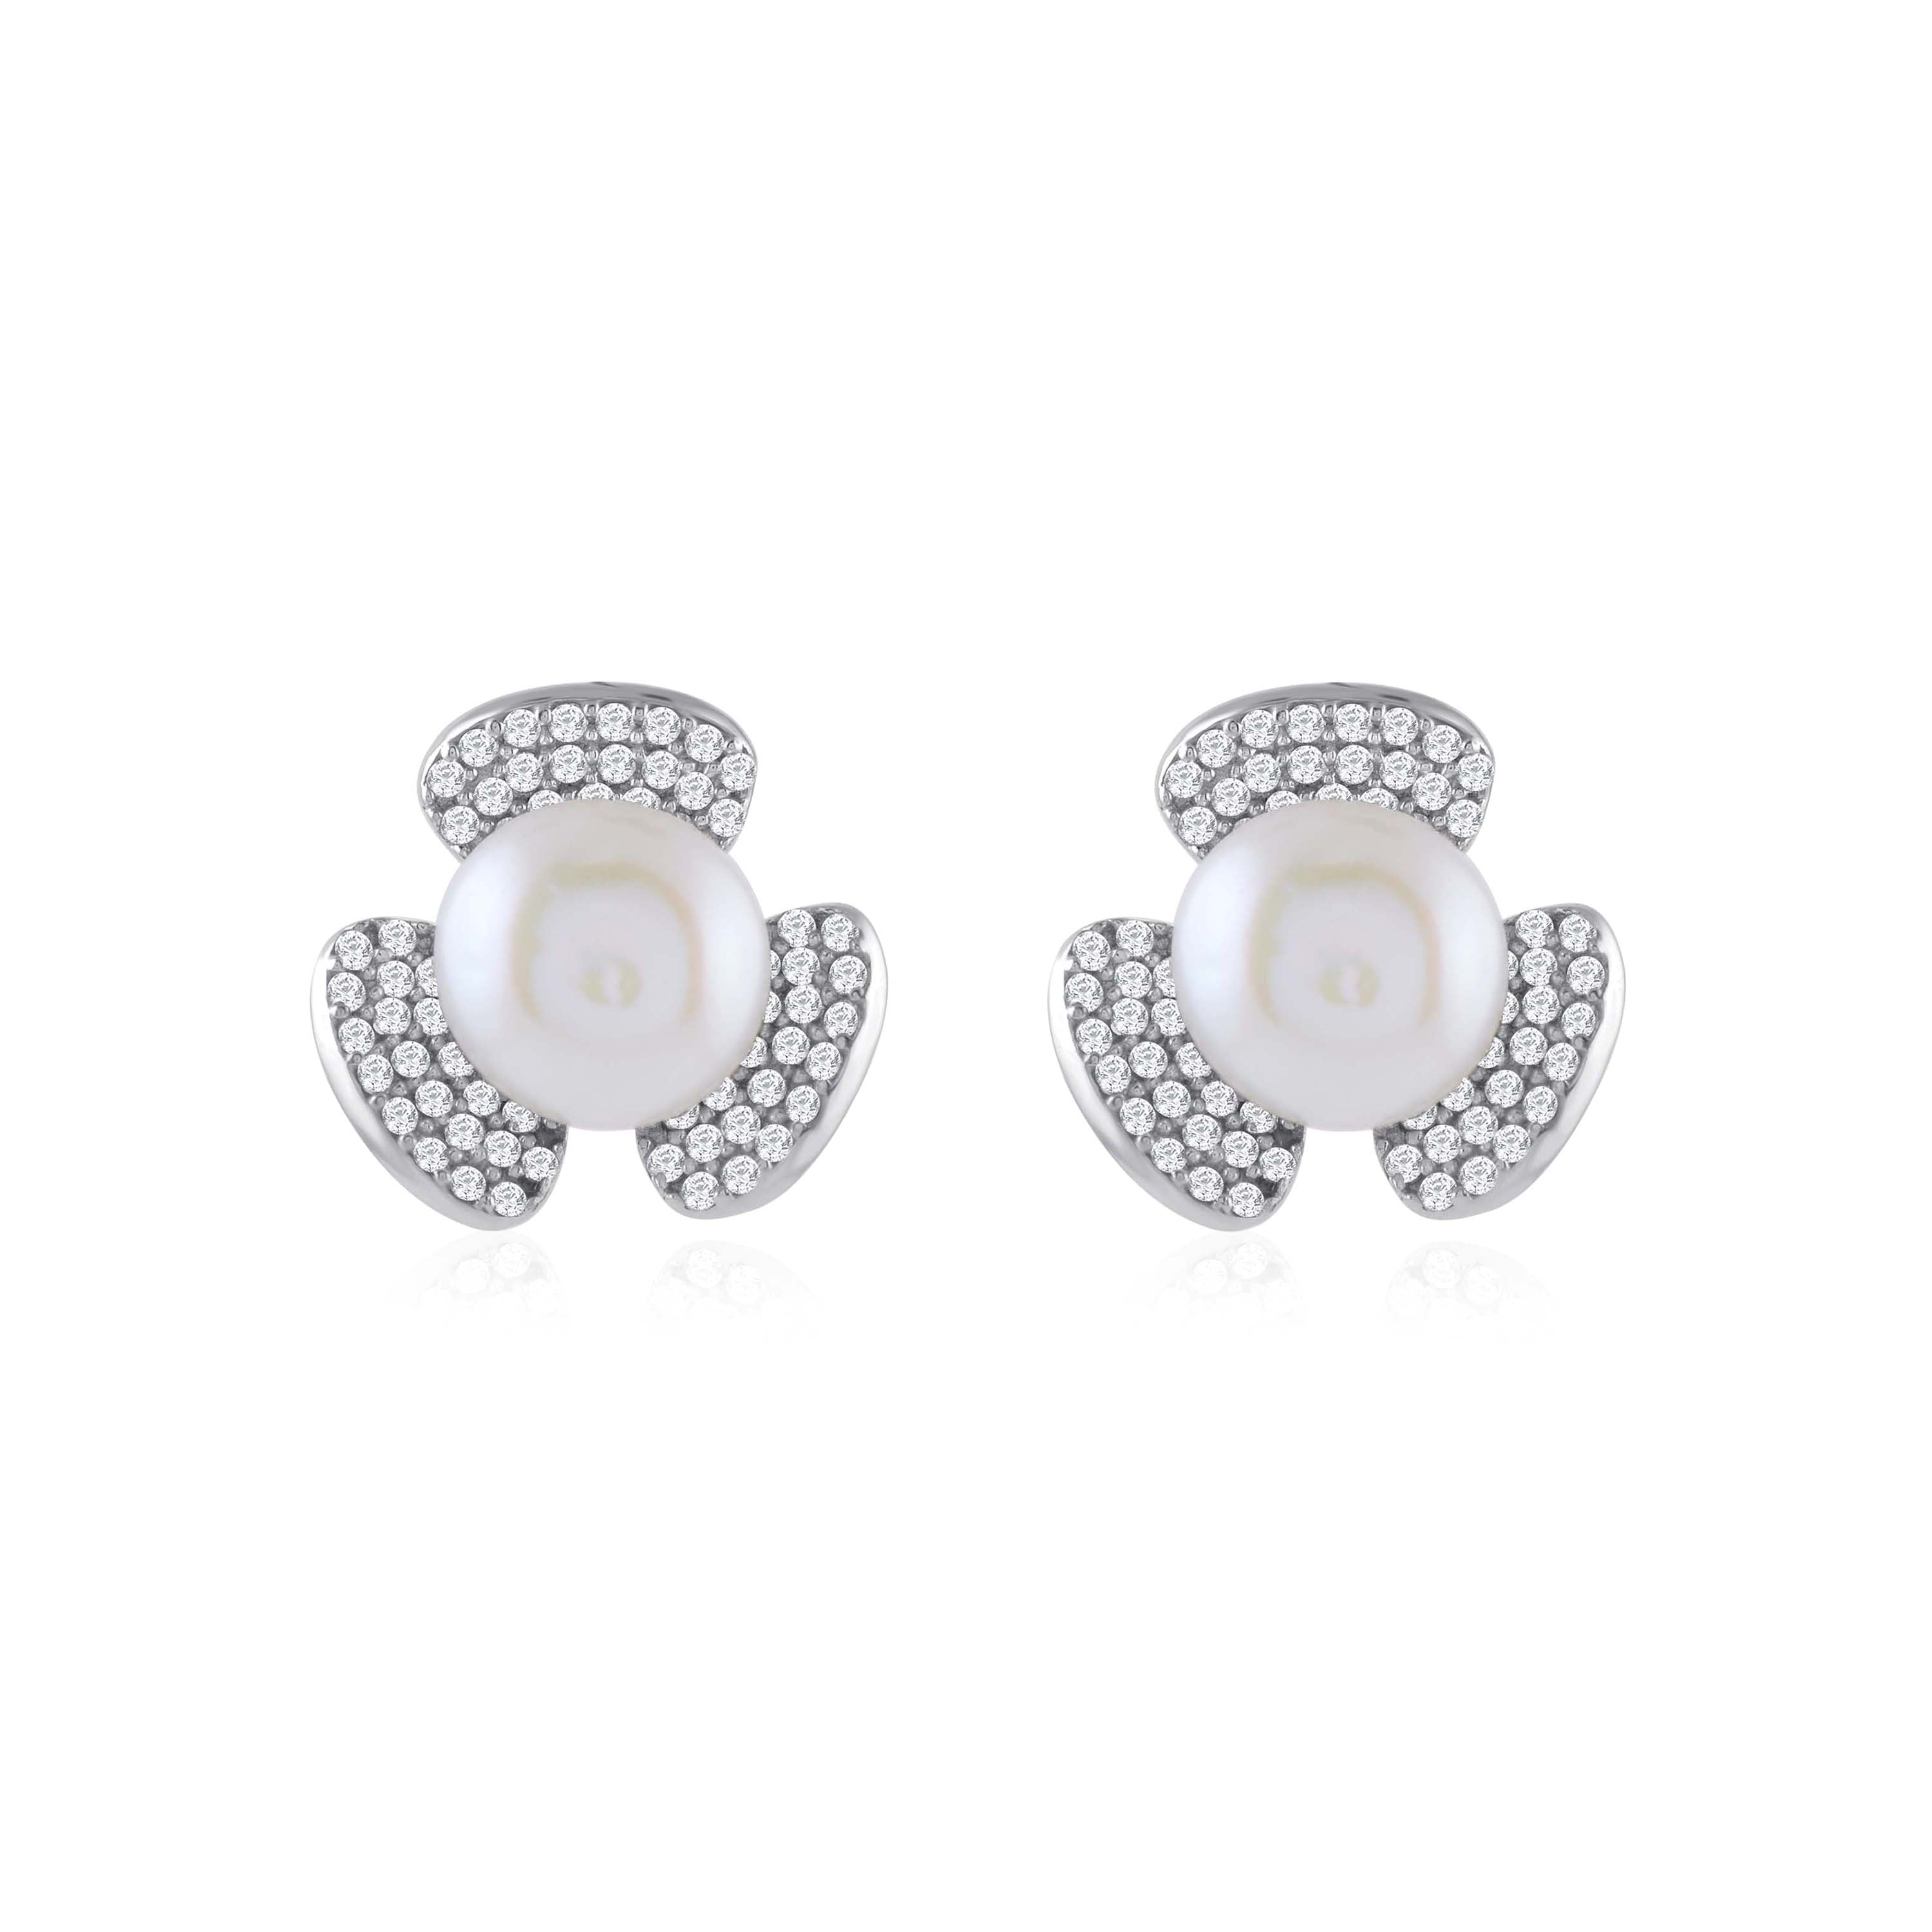 Floral studs with Button Pearl Earrings